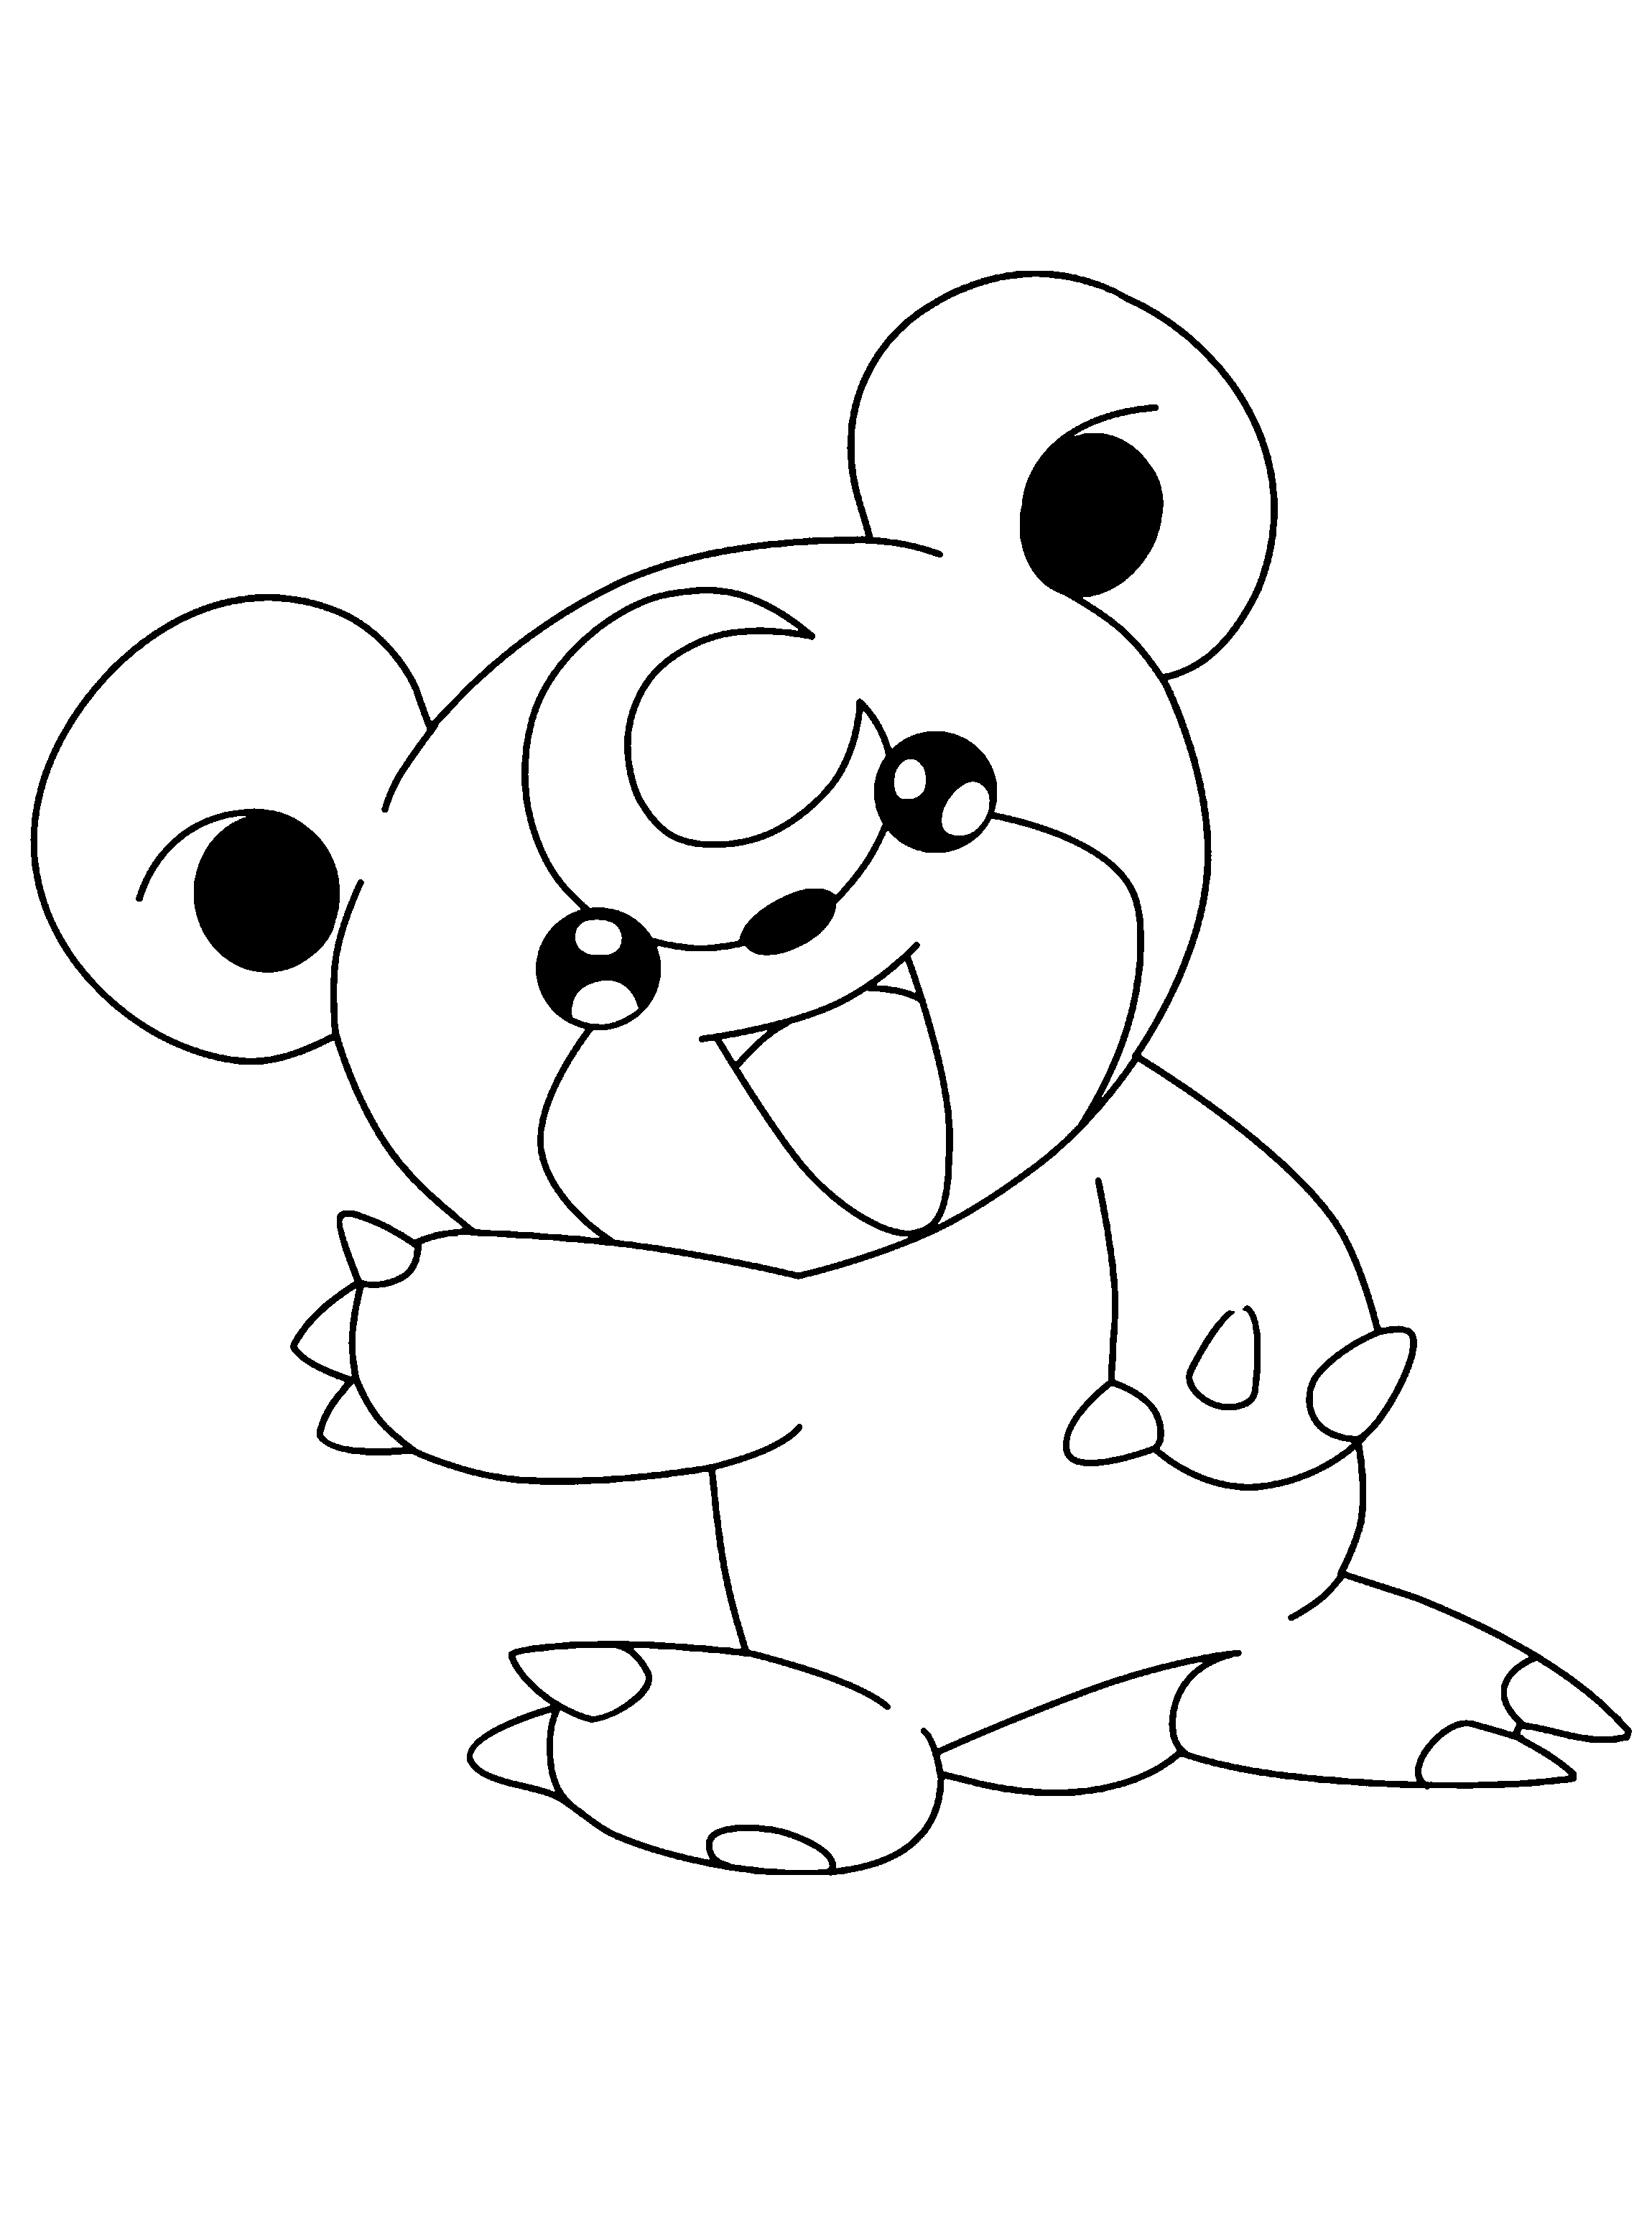 animated-coloring-pages-pokemon-image-0123